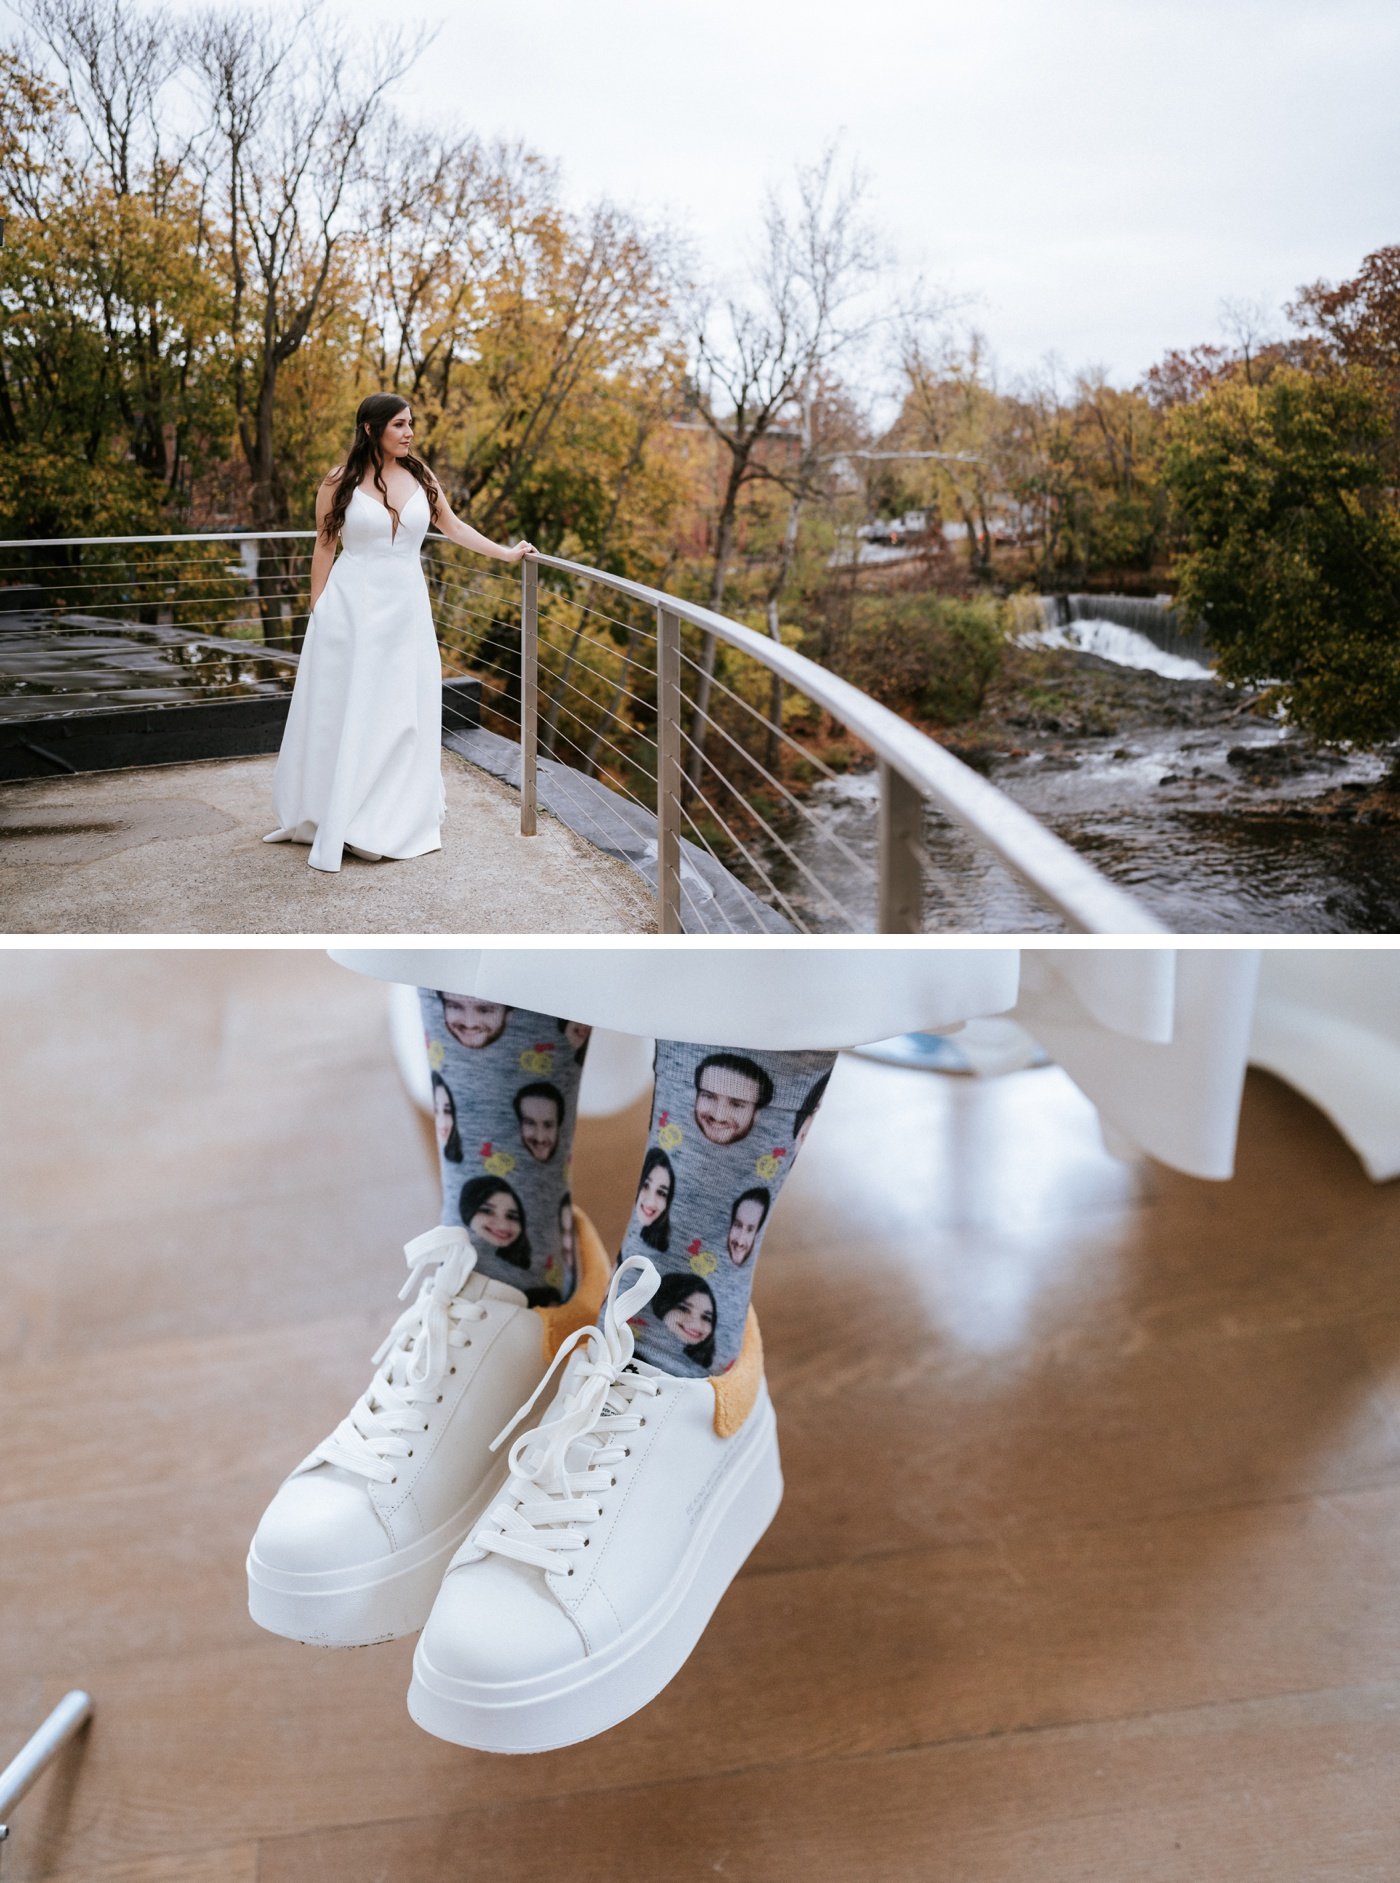 Custom wedding socks with the bride and groom's faces